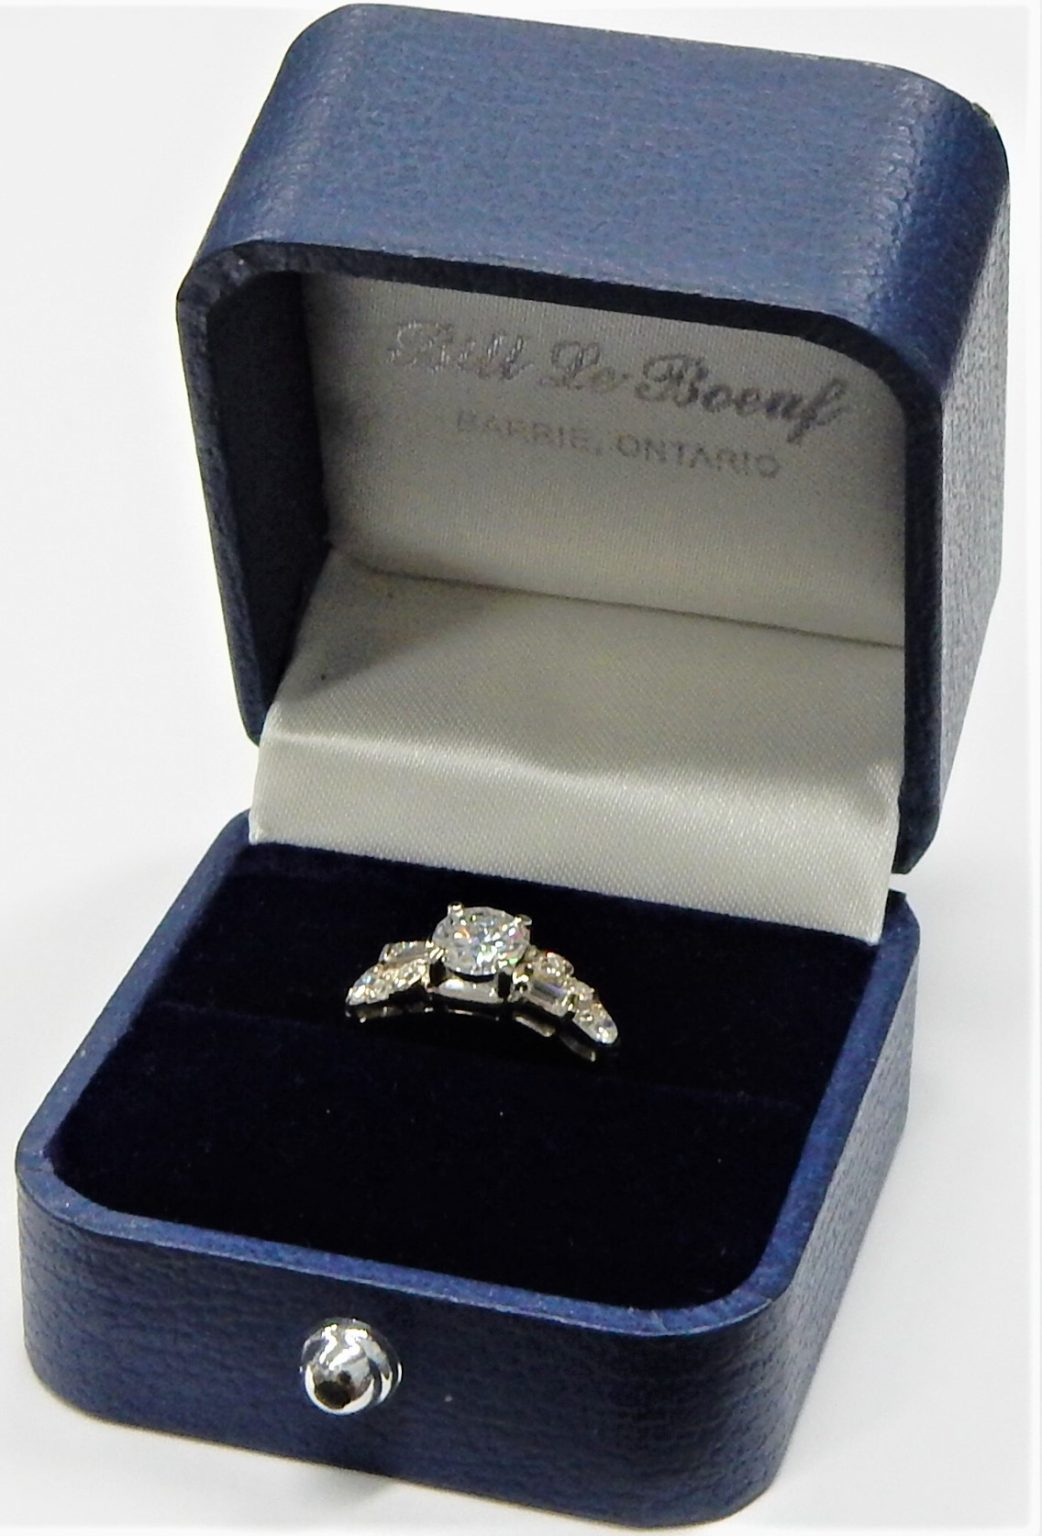 Bill Le Boeuf Jewellers - Barrie, Ontario - rings $3000 to $5000